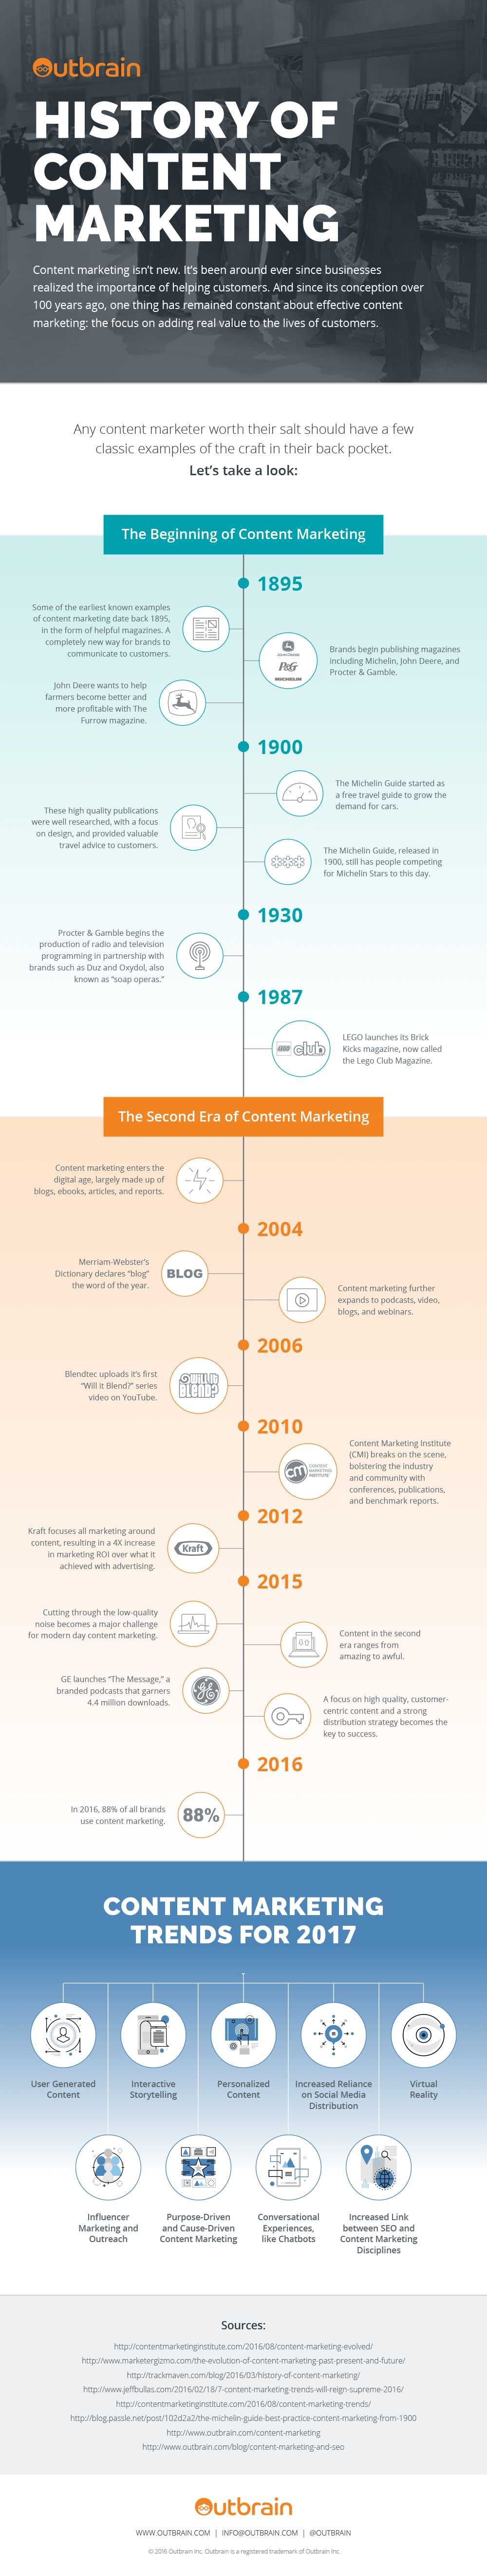 History of Content Marketing - #Infographic